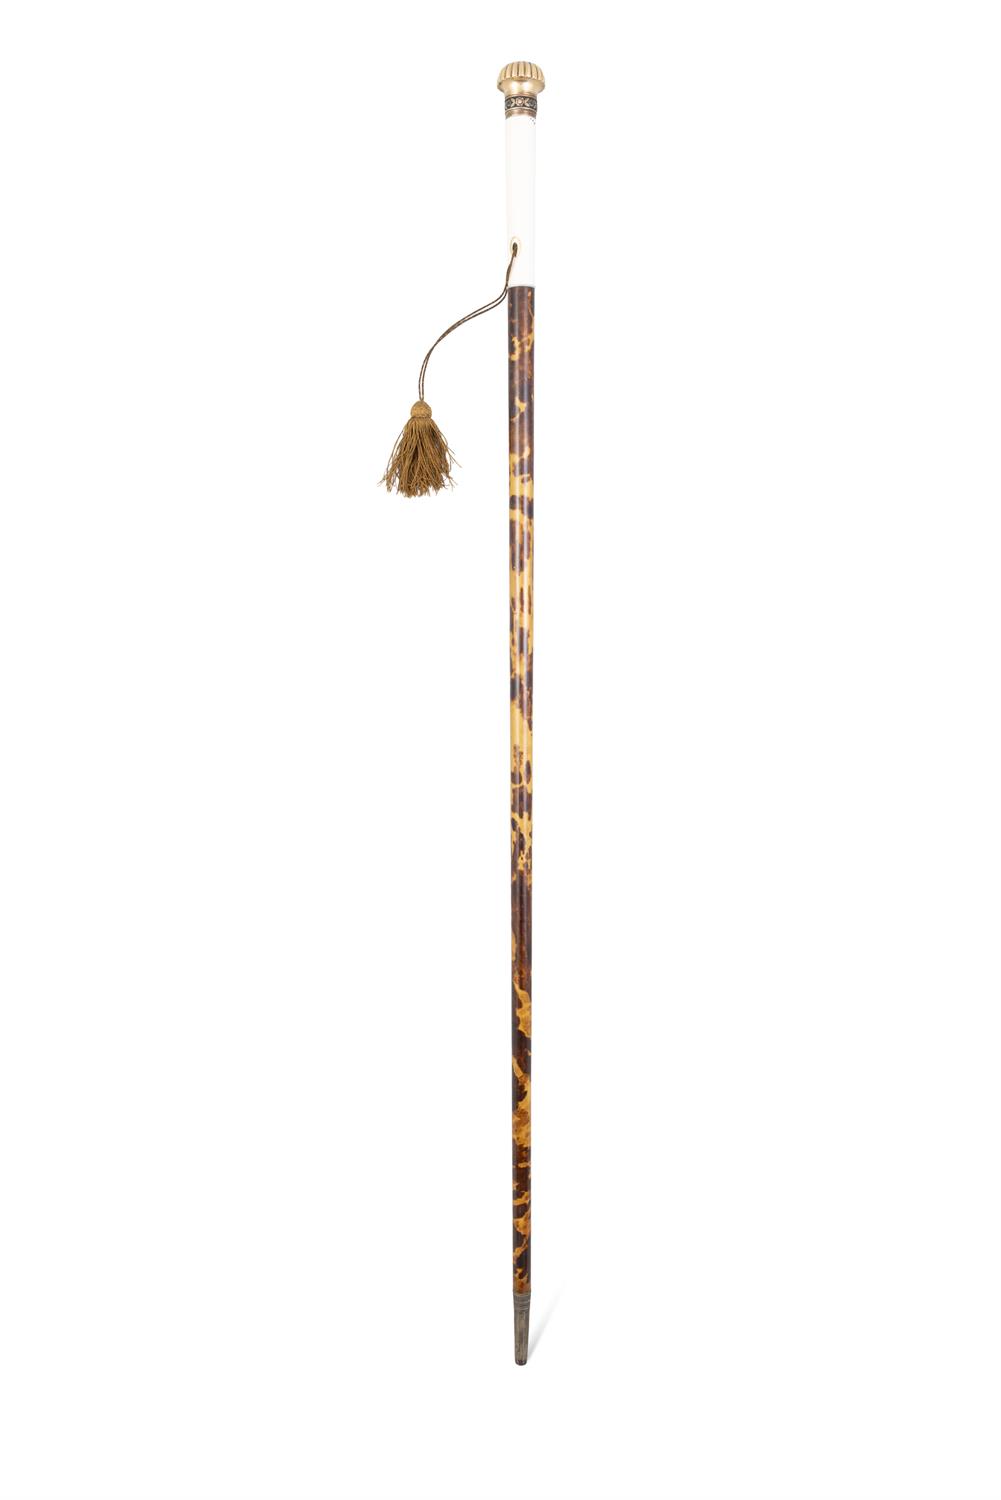 *A WALKING CANE, 19TH CENTURY with gilt metal top, inscribed with crest, with ivory and faux